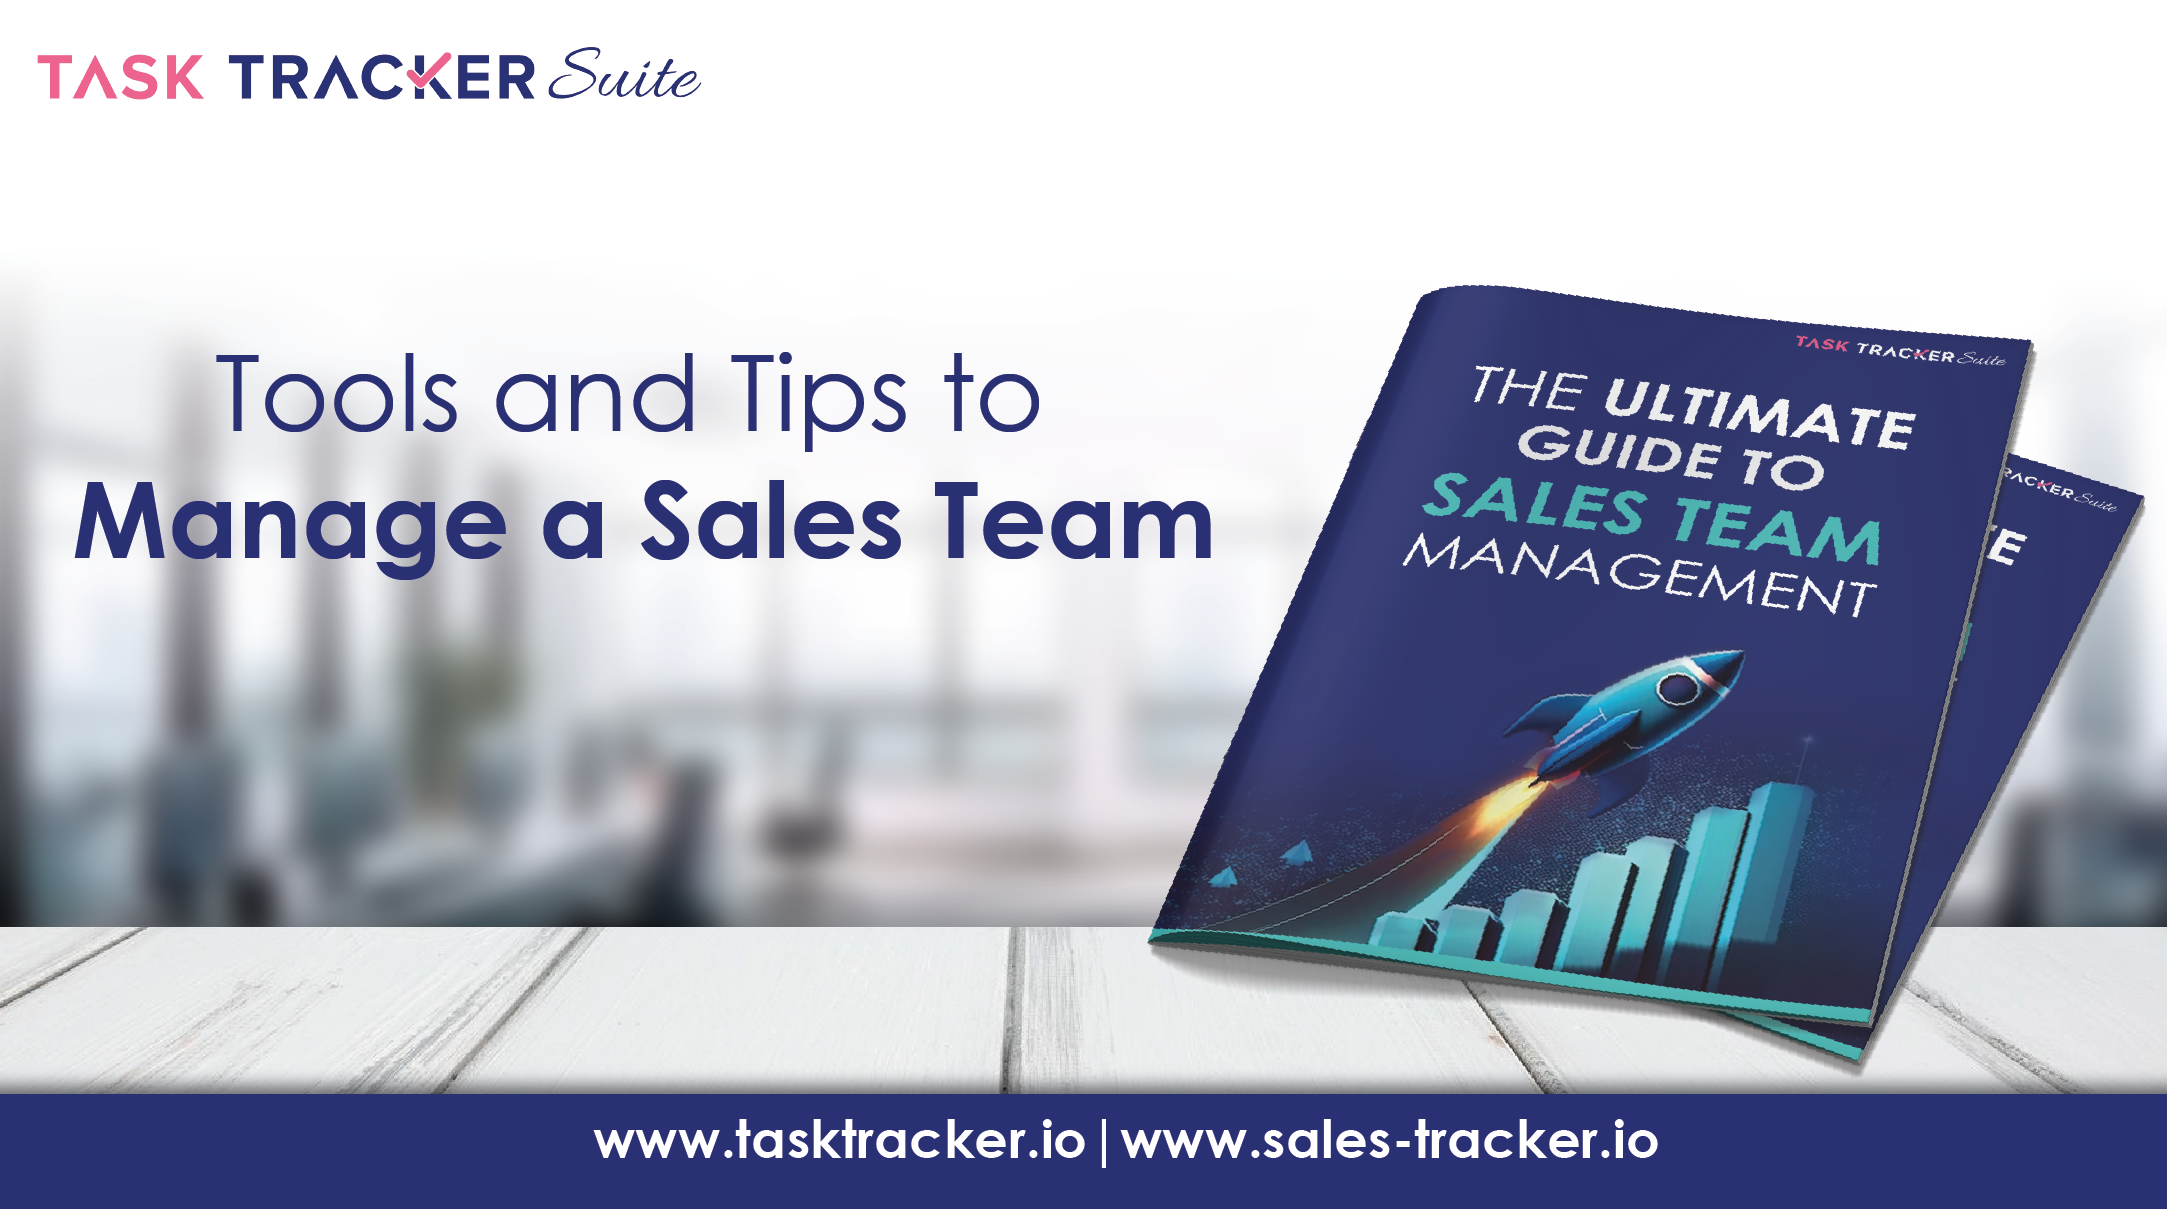 The Ultimate Guide to Sales Team Management: Tips, Tools, and Best Practices